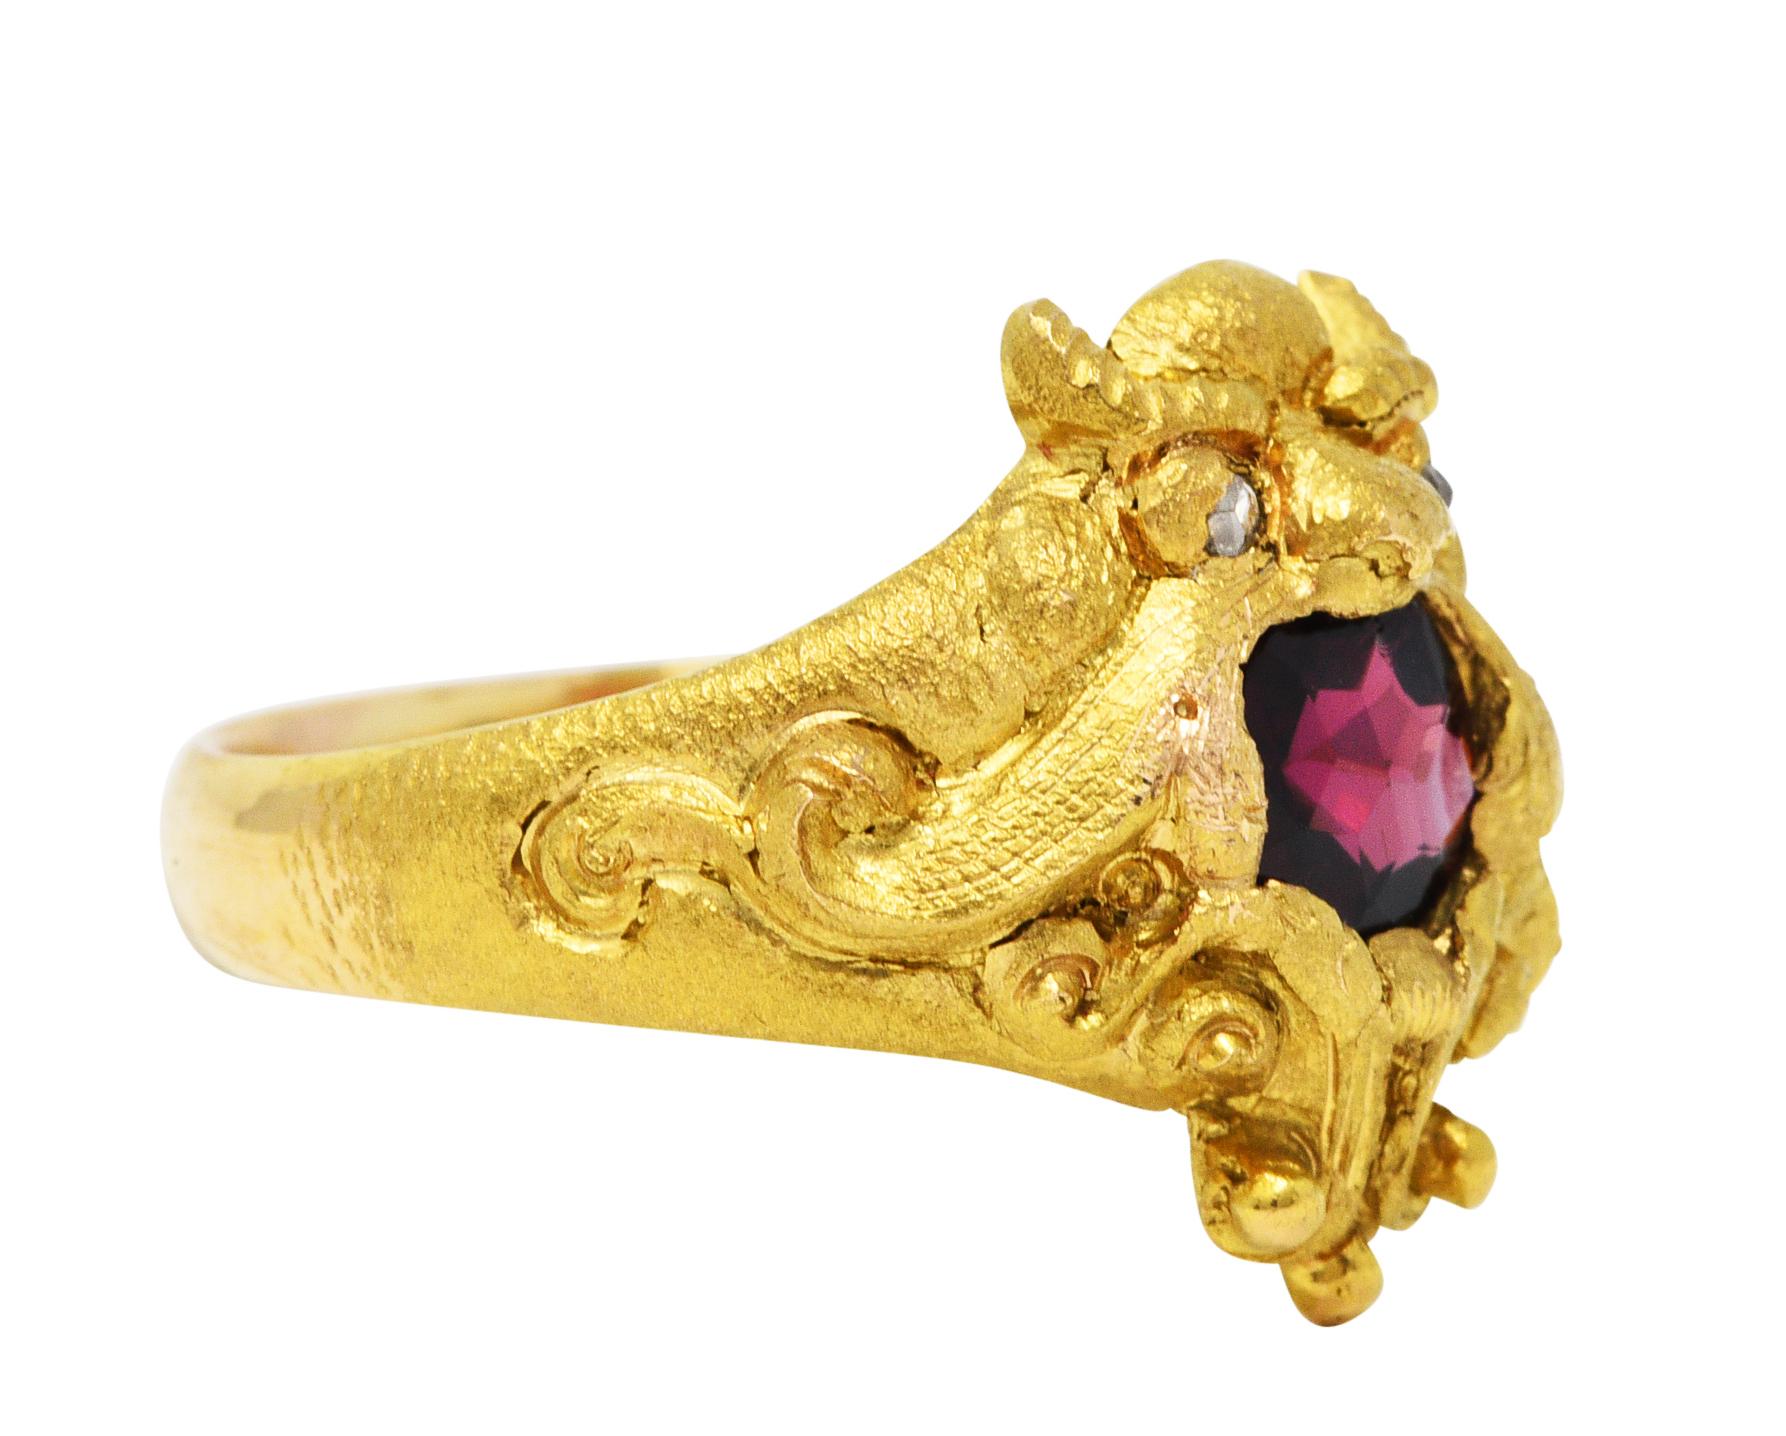 Band ring depicts a highly rendered gargoyle grotesque

Horned with scrolling whiplash and rose cut diamond eyes

Featuring a round cut garnet measuring approximately 5.5 mm and saturated red in color

Completed by a texturous matte gold